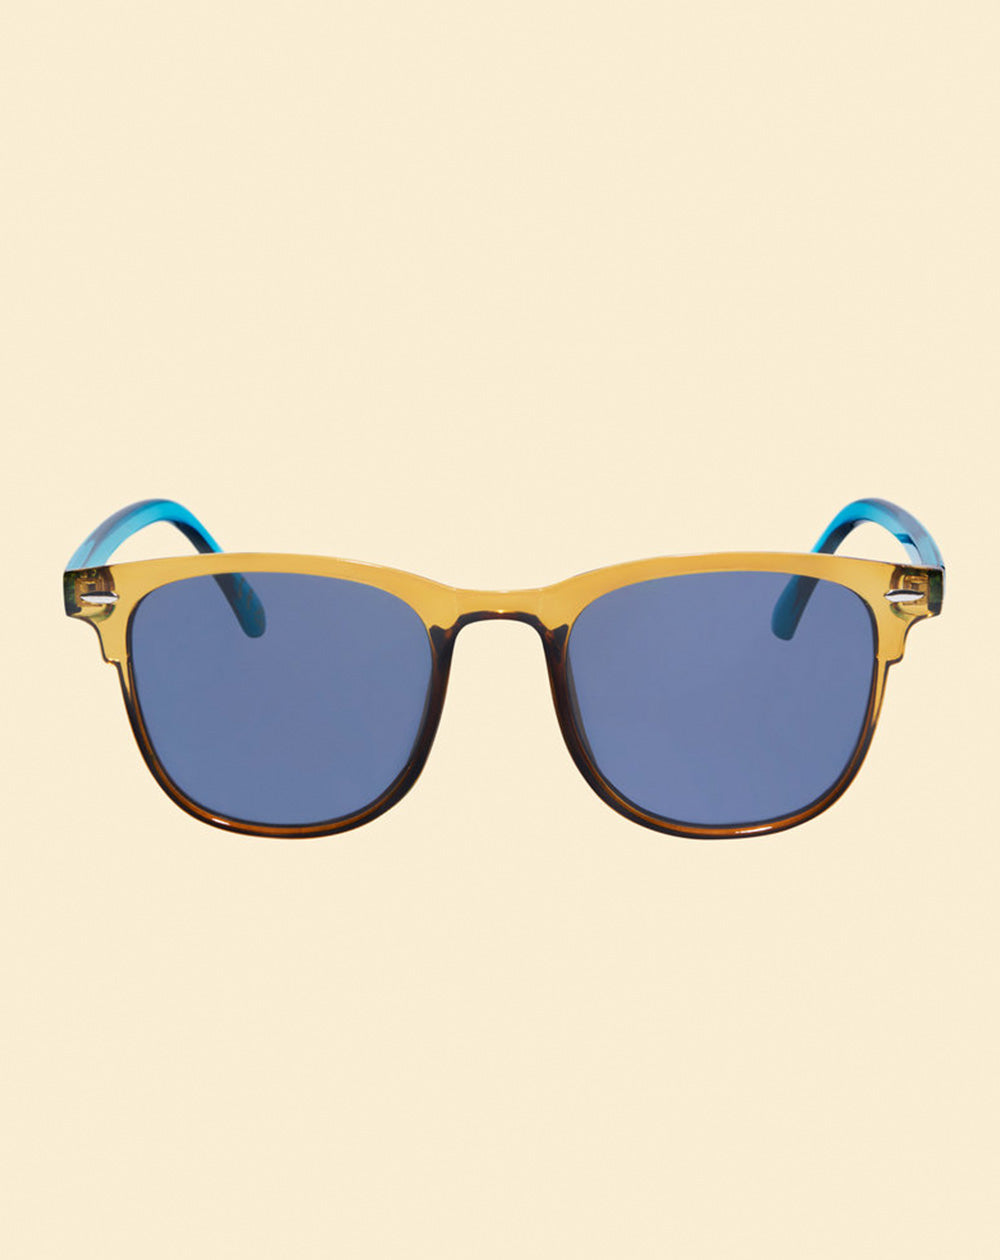 Powder CAR12 - Limited Carina Sunglasses in Turquoise/Nude